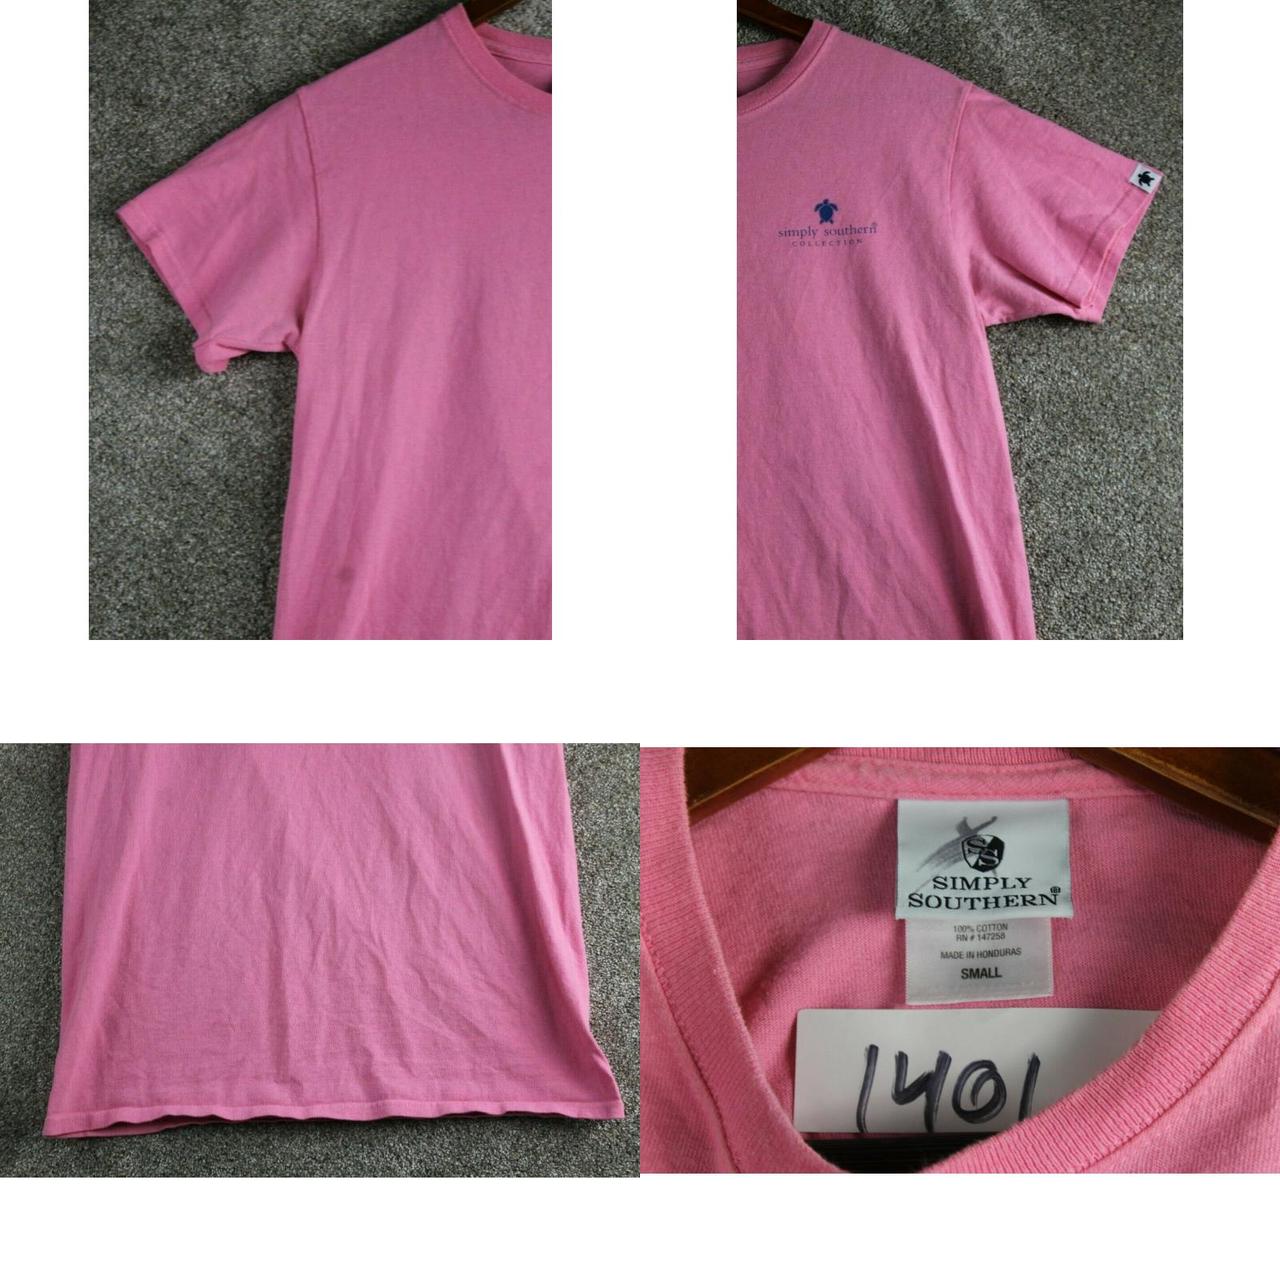 Product Image 4 - Simple Southern Women's Pink t